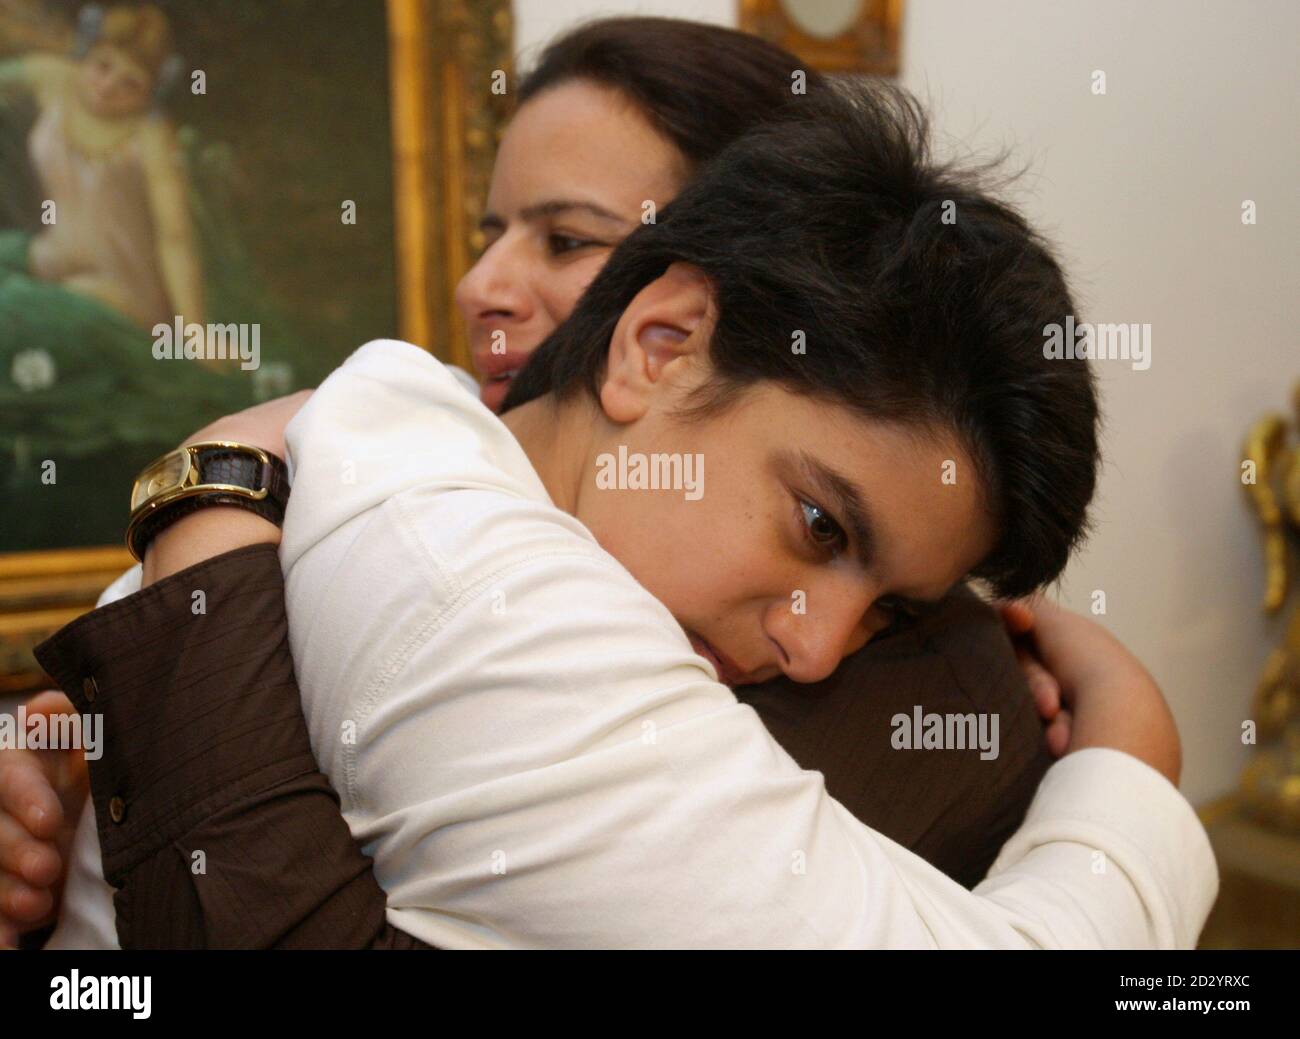 Amin al-Khansa, who was kidnapped by a Lebanese gang, hugs his mother at  his home after being rescued by Lebanese security forces in Beirut April 2,  2009. Khansa, a 14-year-old student, was